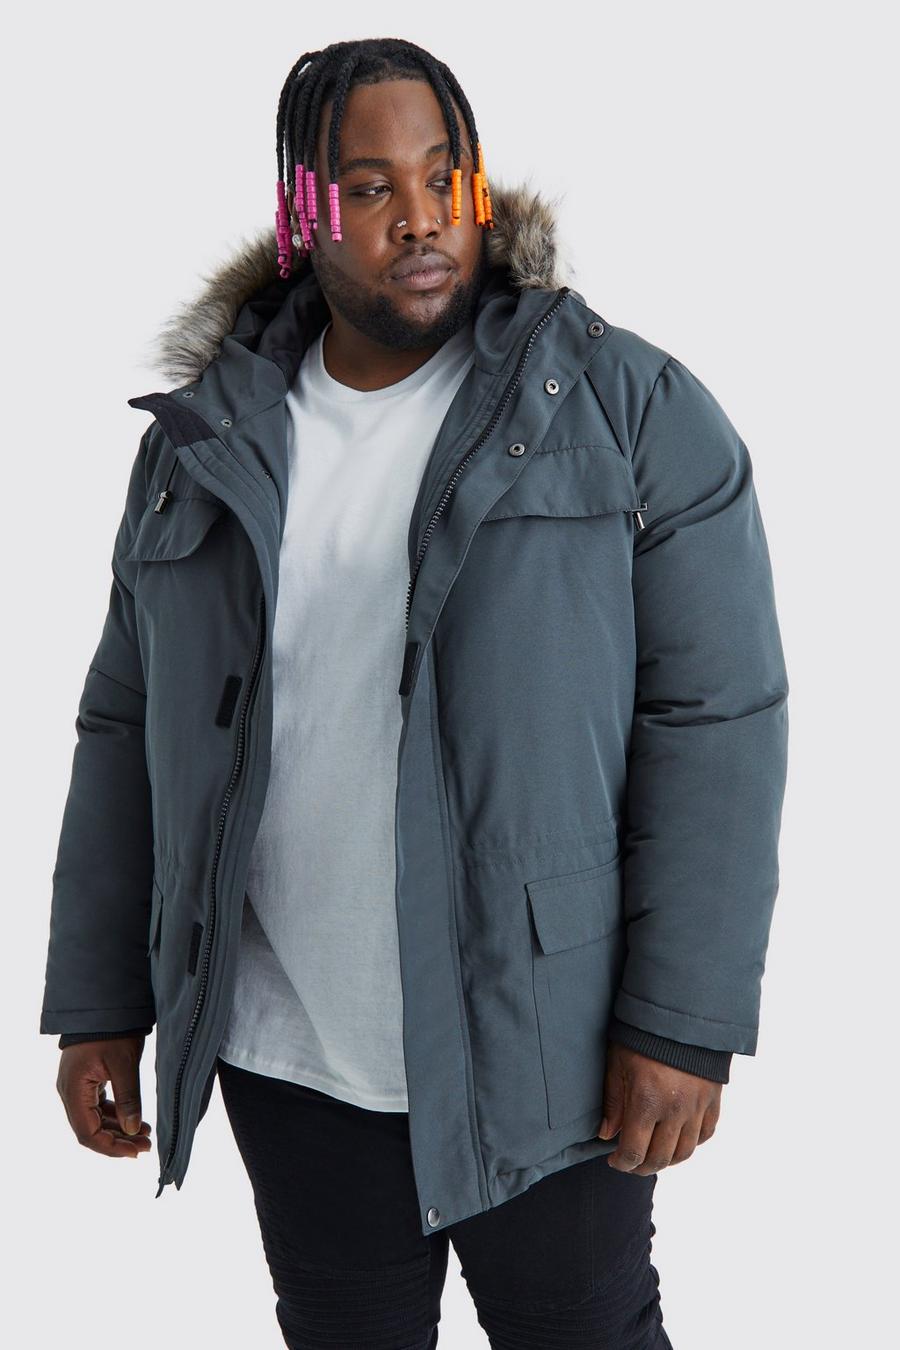 Plus Faux Fur Hooded Arctic Parka Jacket in Charcoal